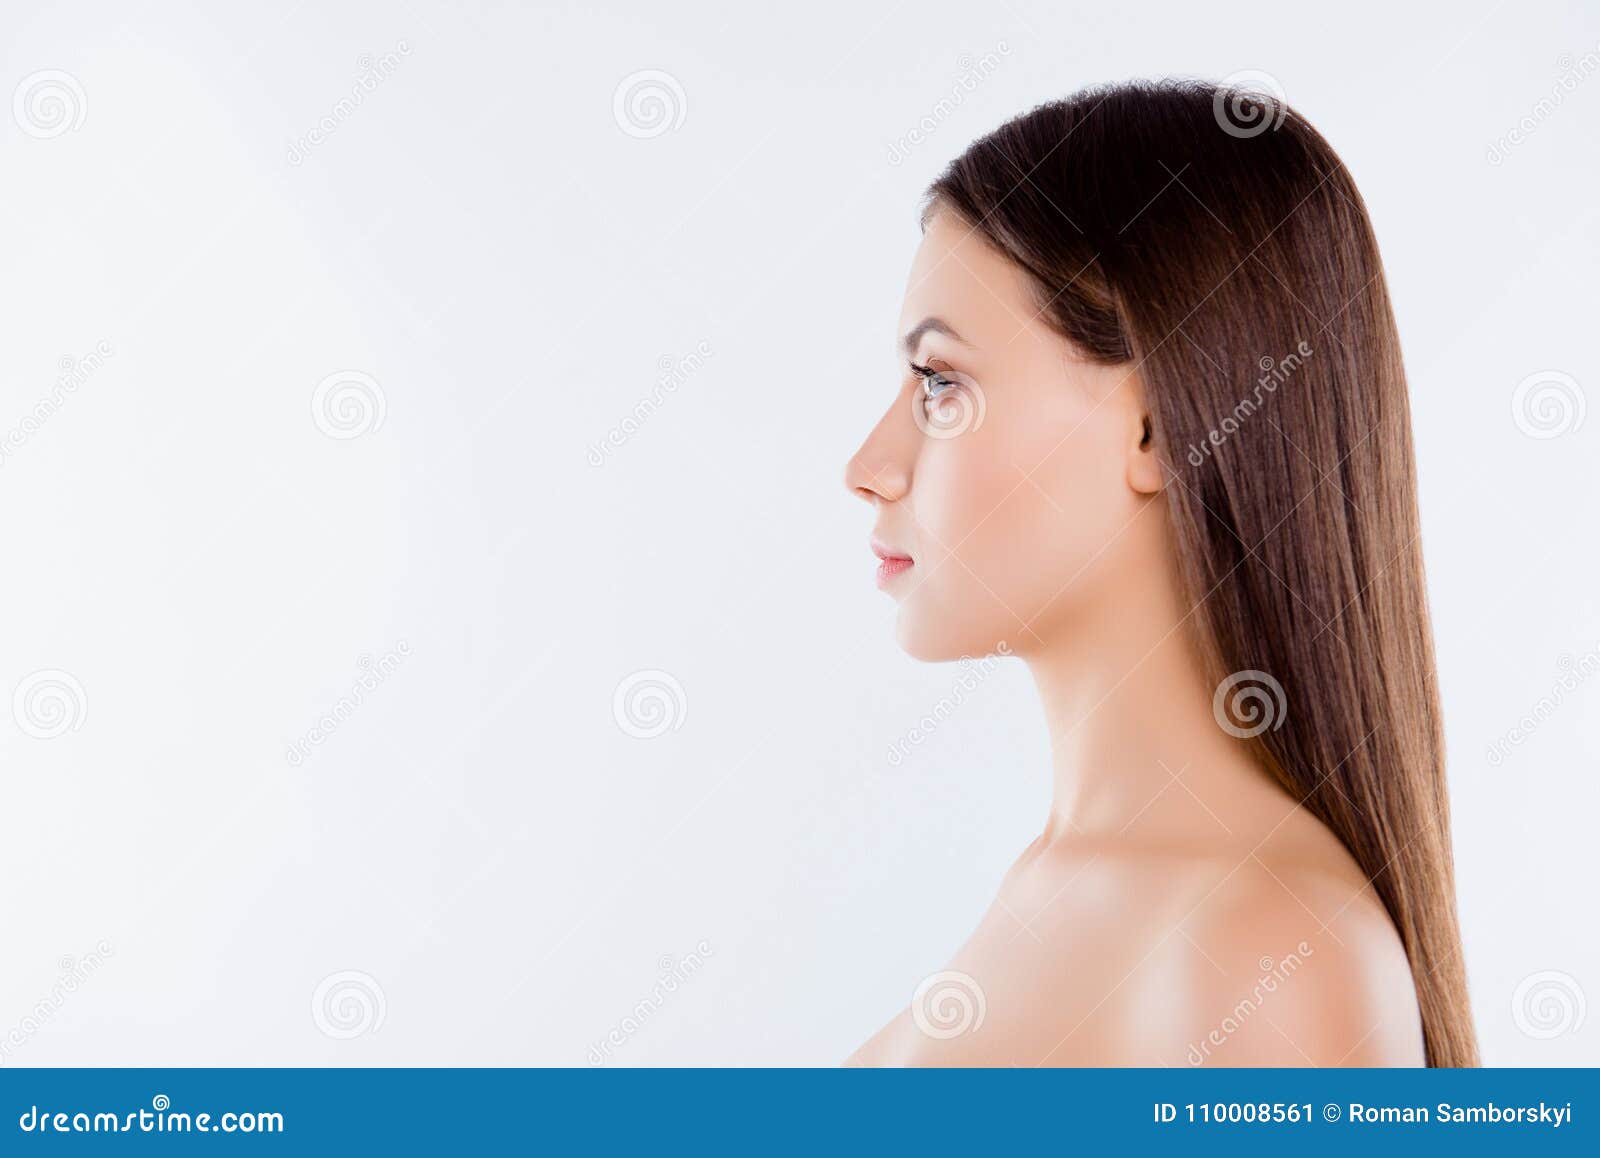 115 573 Woman Profile Photos Free Royalty Free Stock Photos From Dreamstime